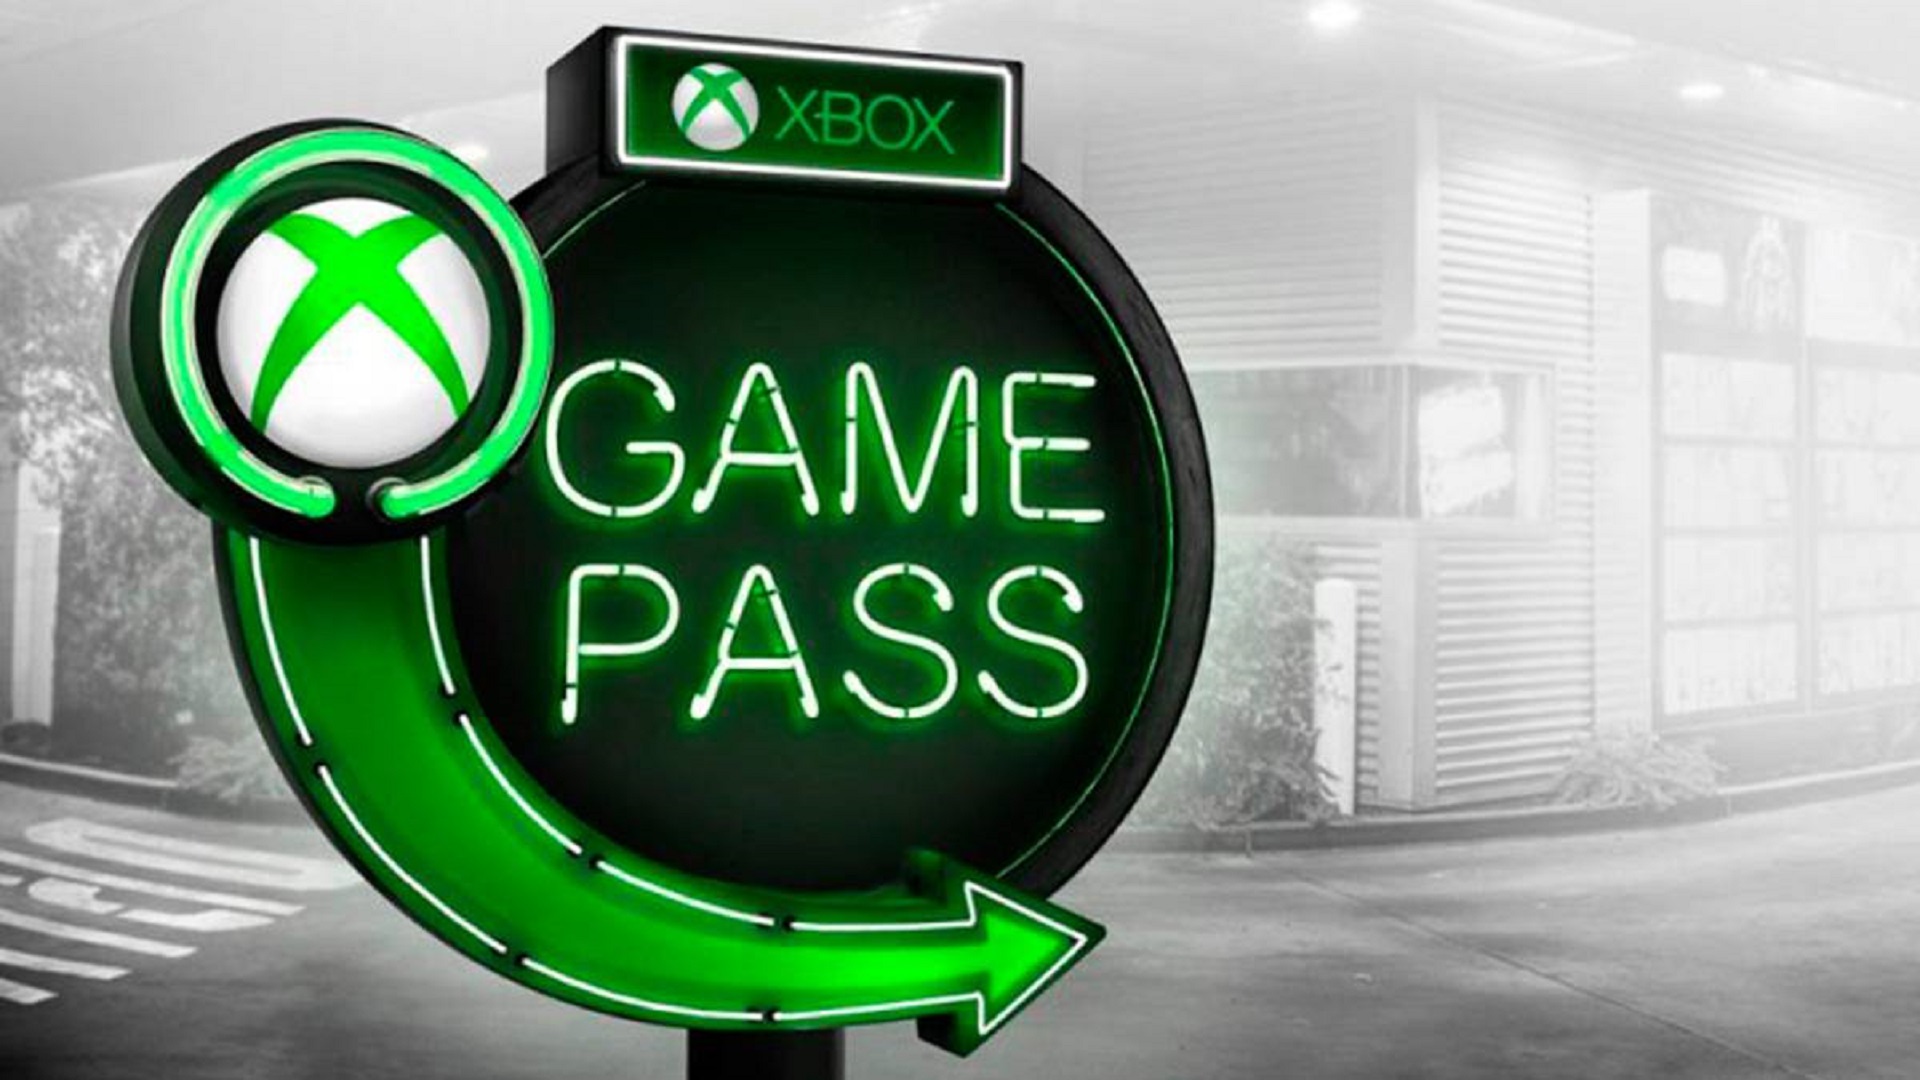 We're entering March, the month in which “The Game” arrives on Xbox Game Pass